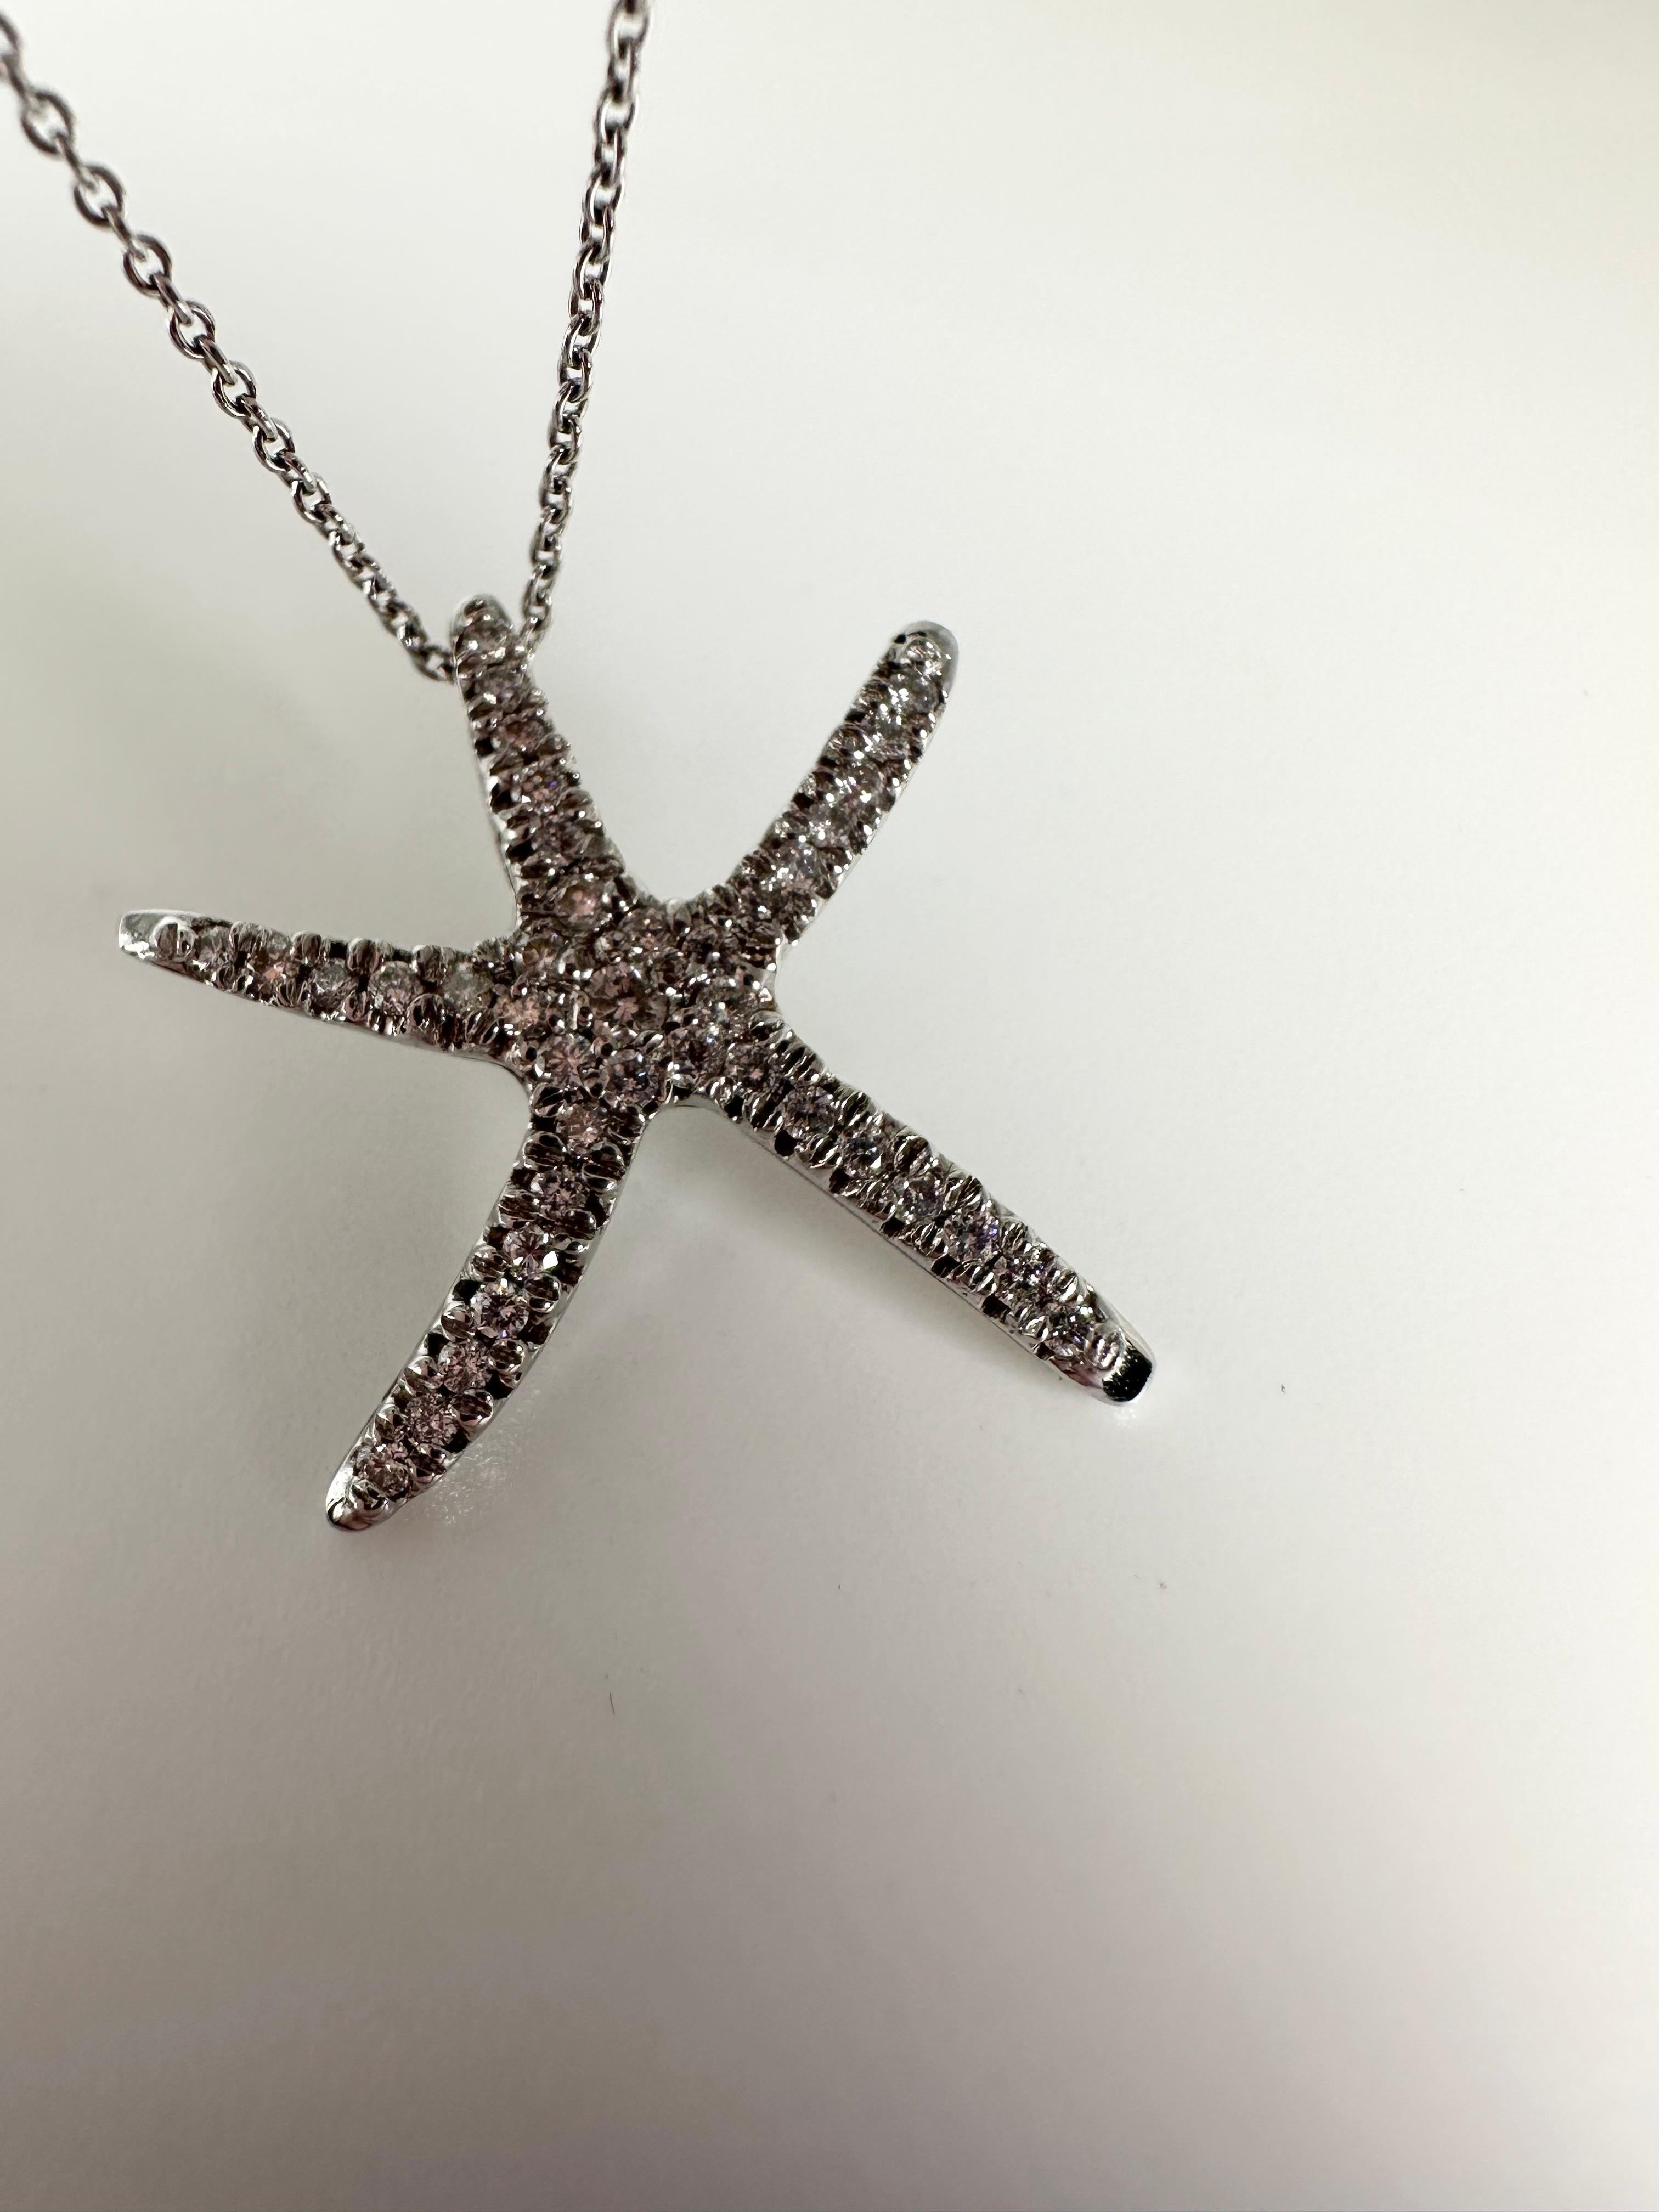 Diamond starfish pendant necklace 14KT white gold well crafted necklace For Sale 1